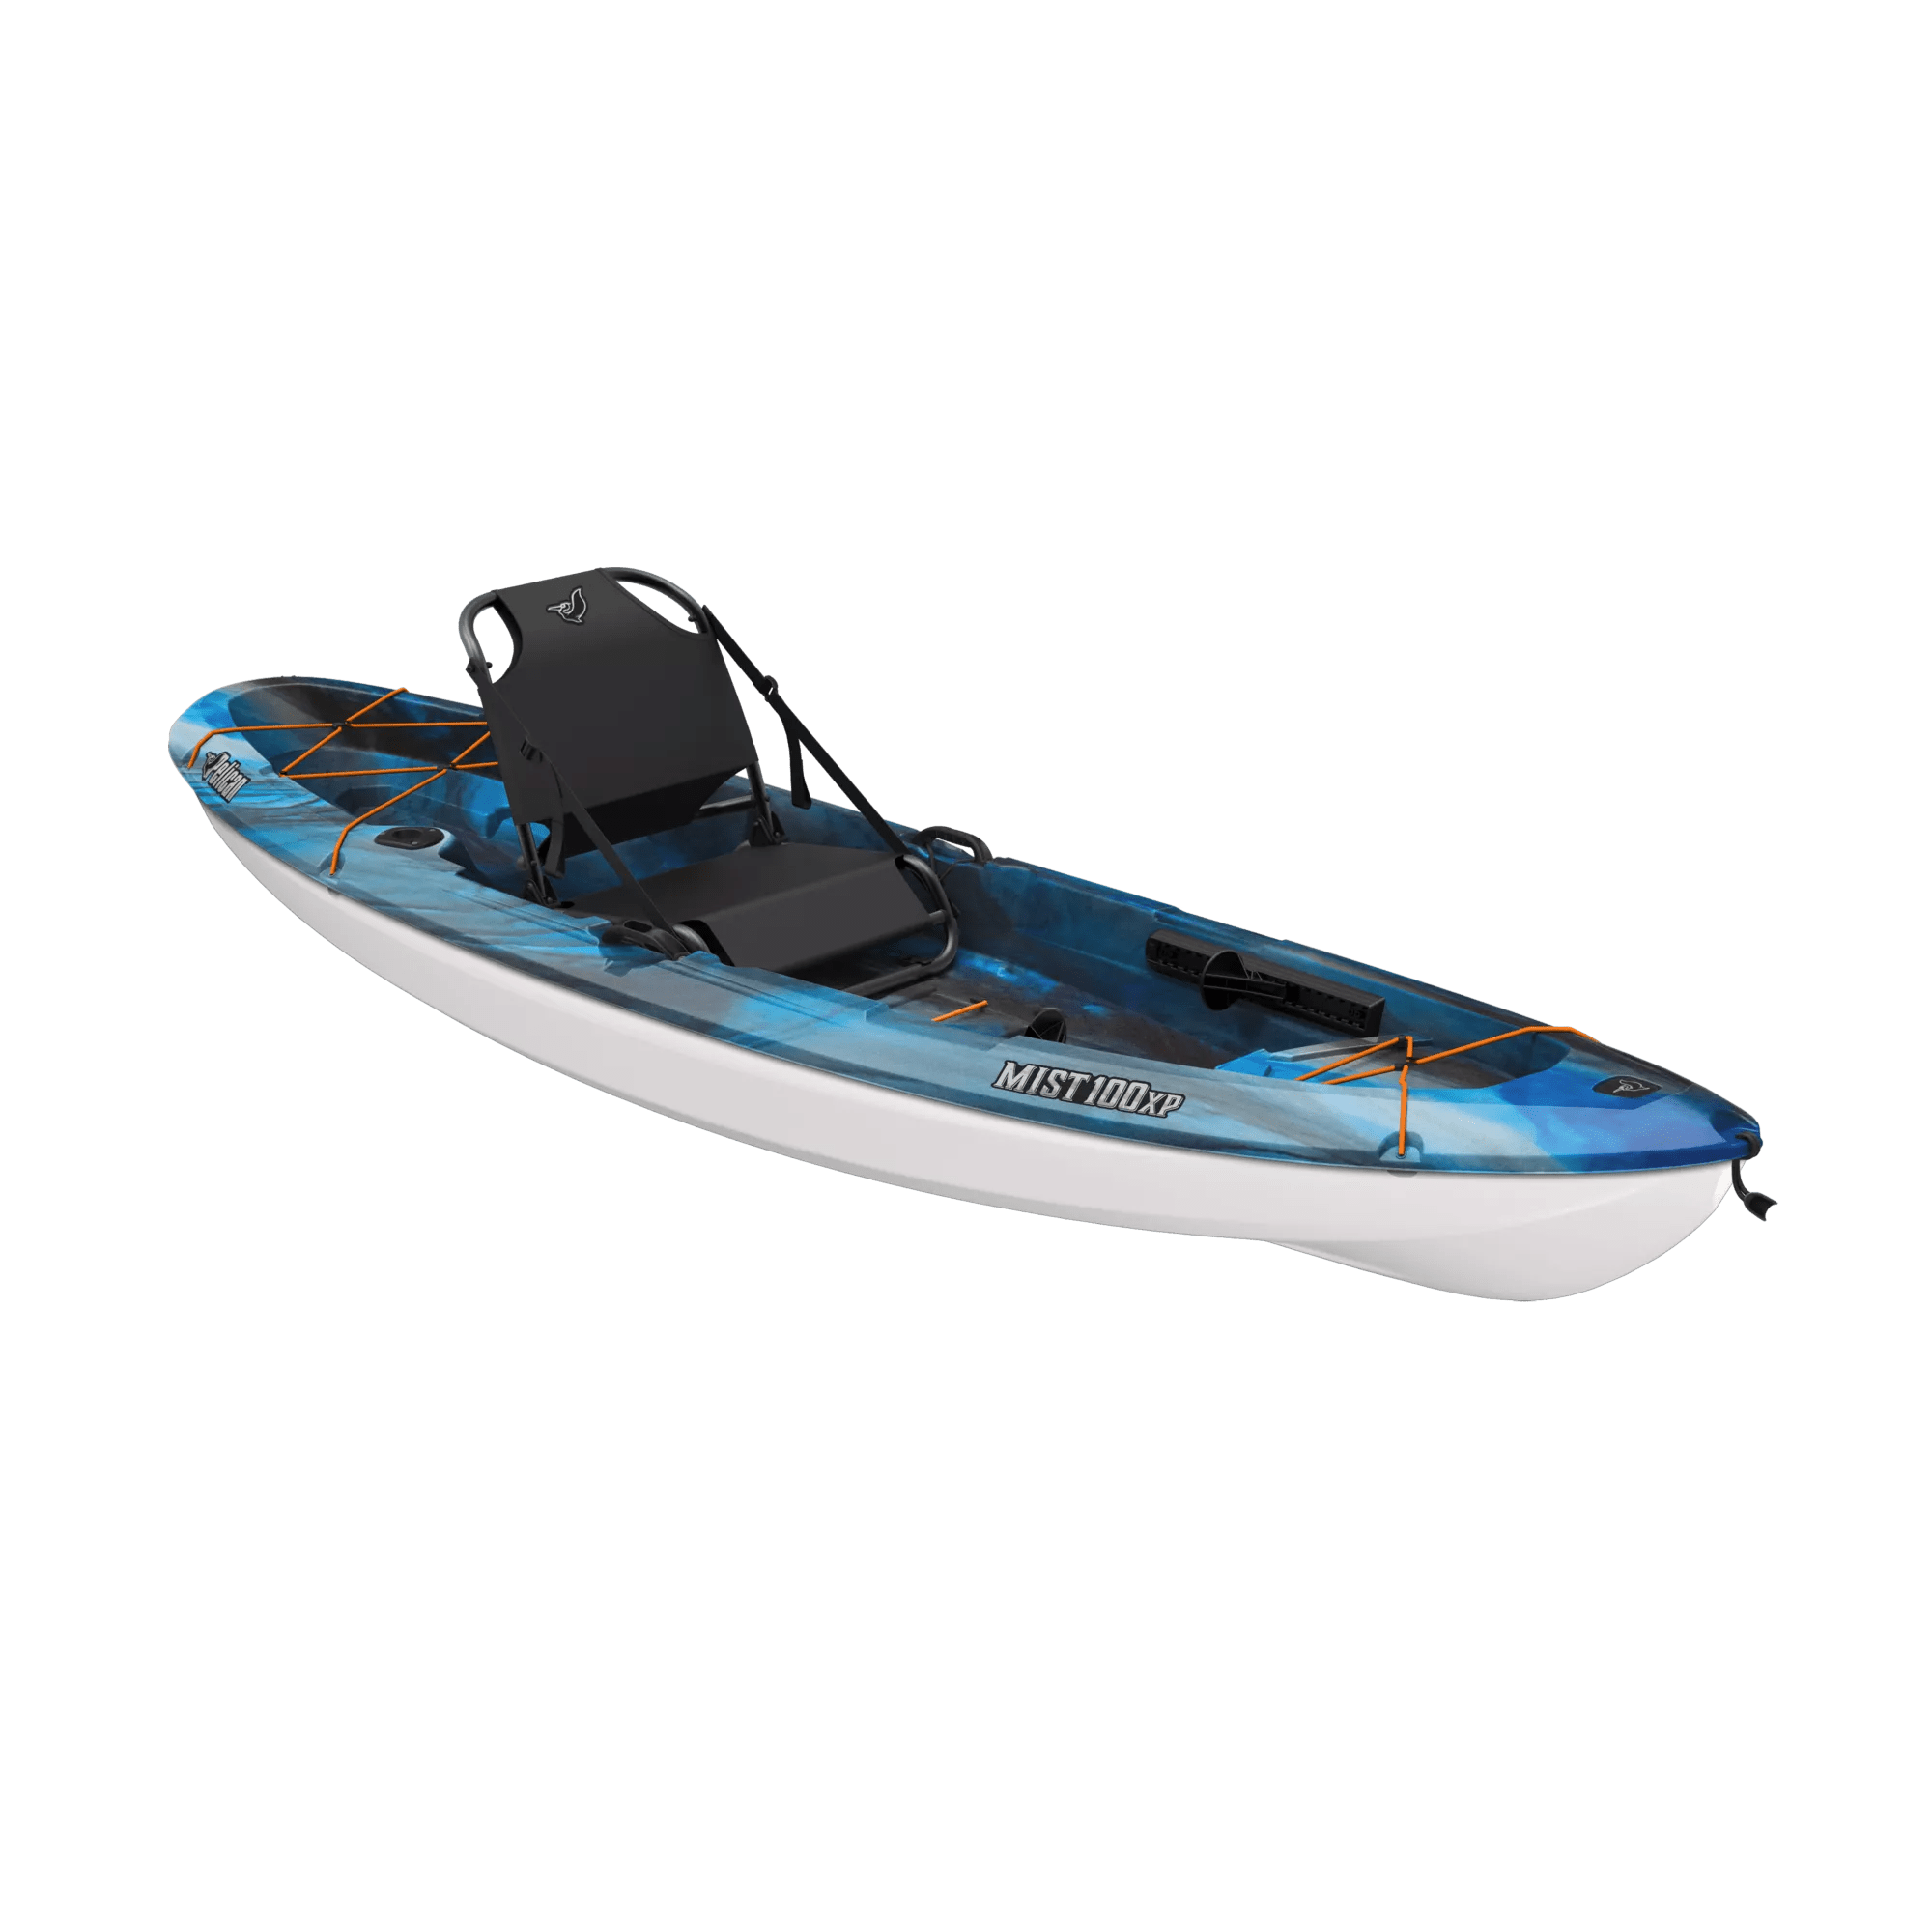 PELICAN - Mist 100XP Angler kayak with Paddle - Blue - MGF10P102-00 - ISO 